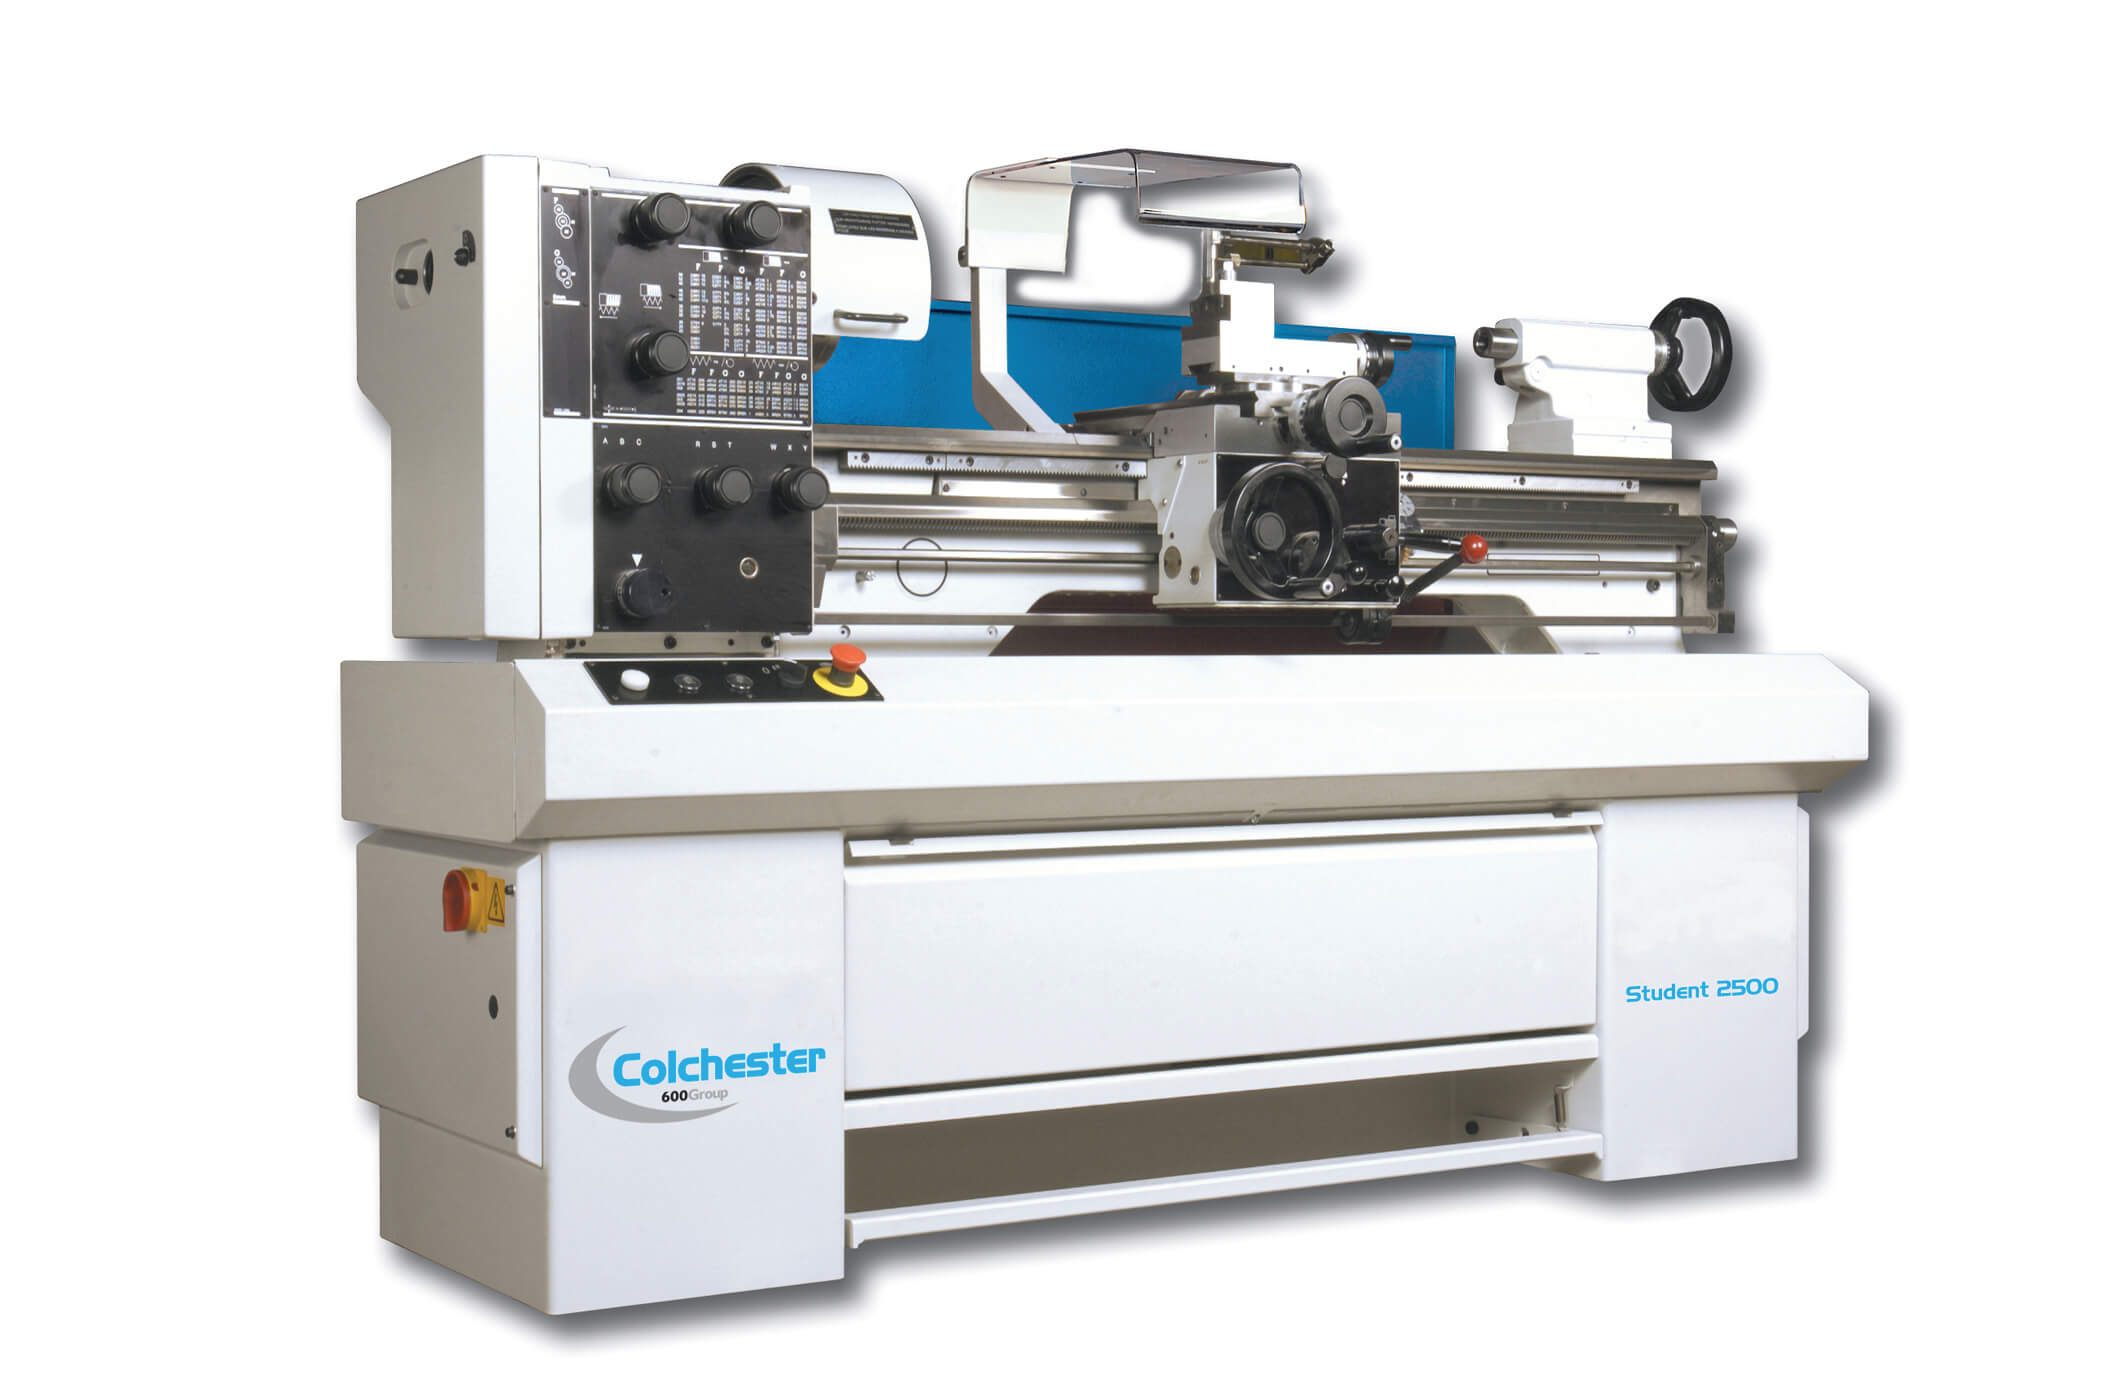 Colchester Student 2500 Engineering Lathe - 1000mm bed - Three Phase